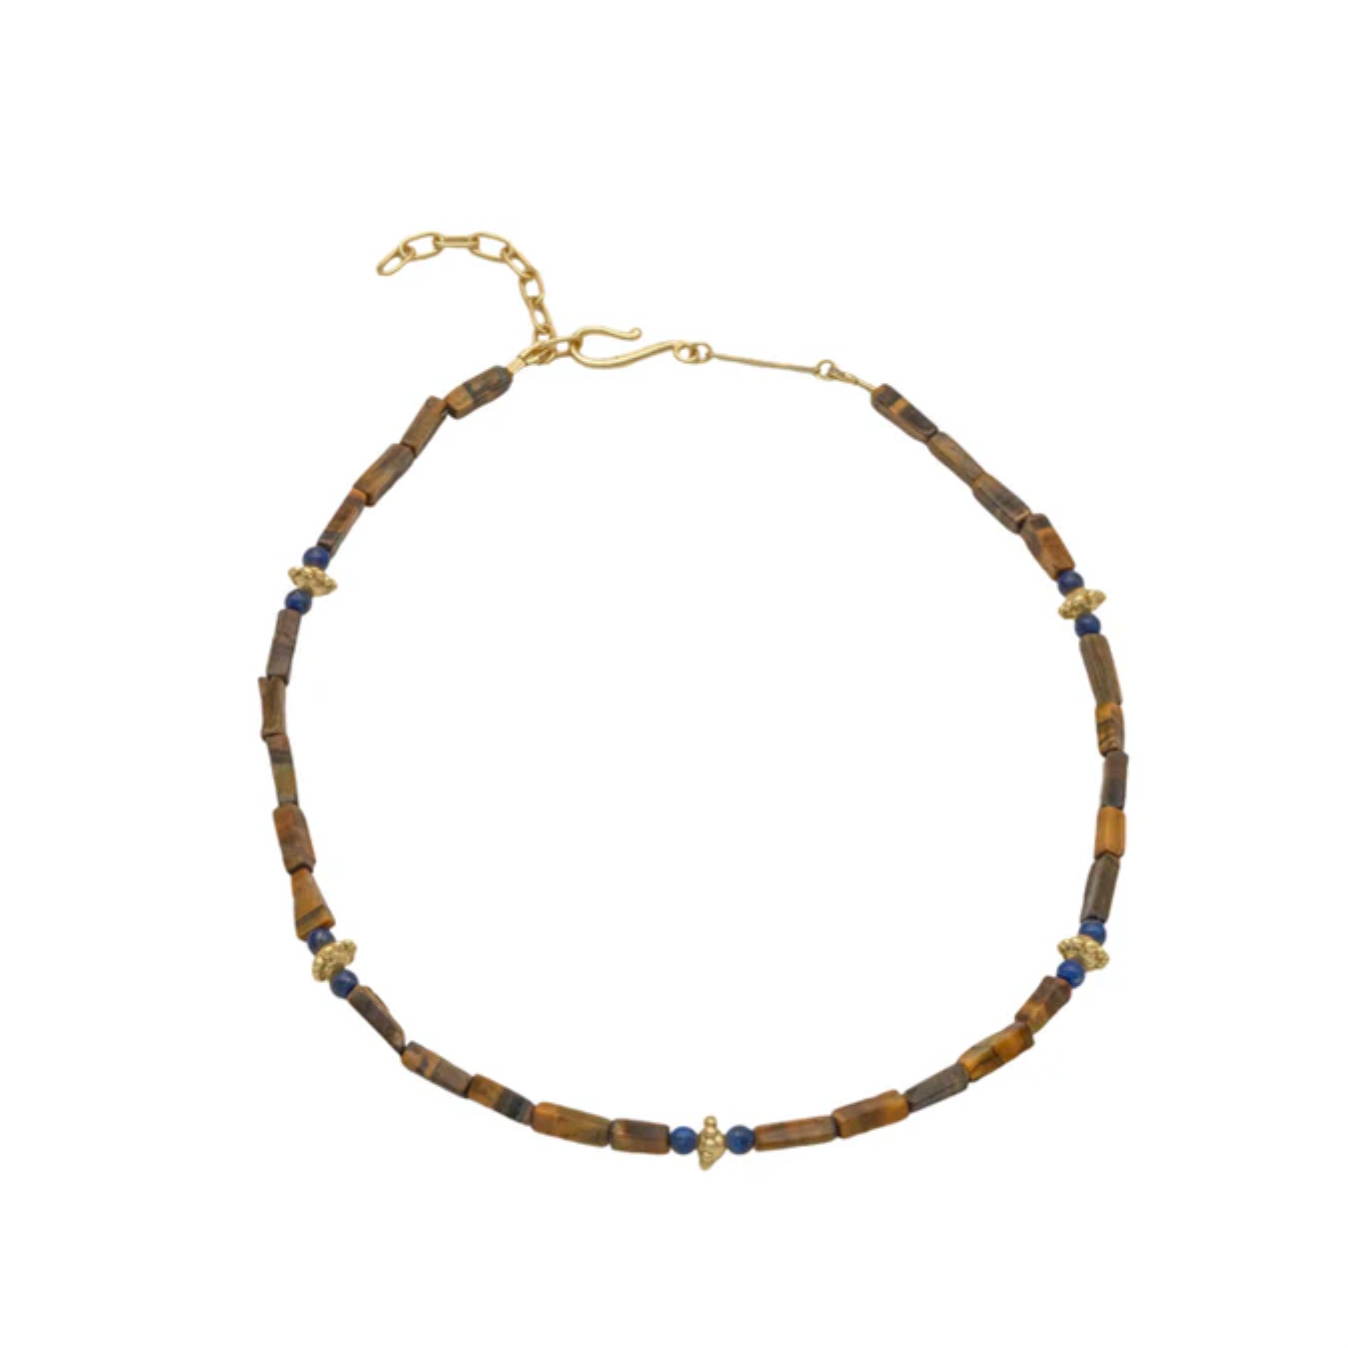 CLEOPATRA'S BLING LISS NECKLACE IN TIGER'S EYE AND LAPIS LAZULI